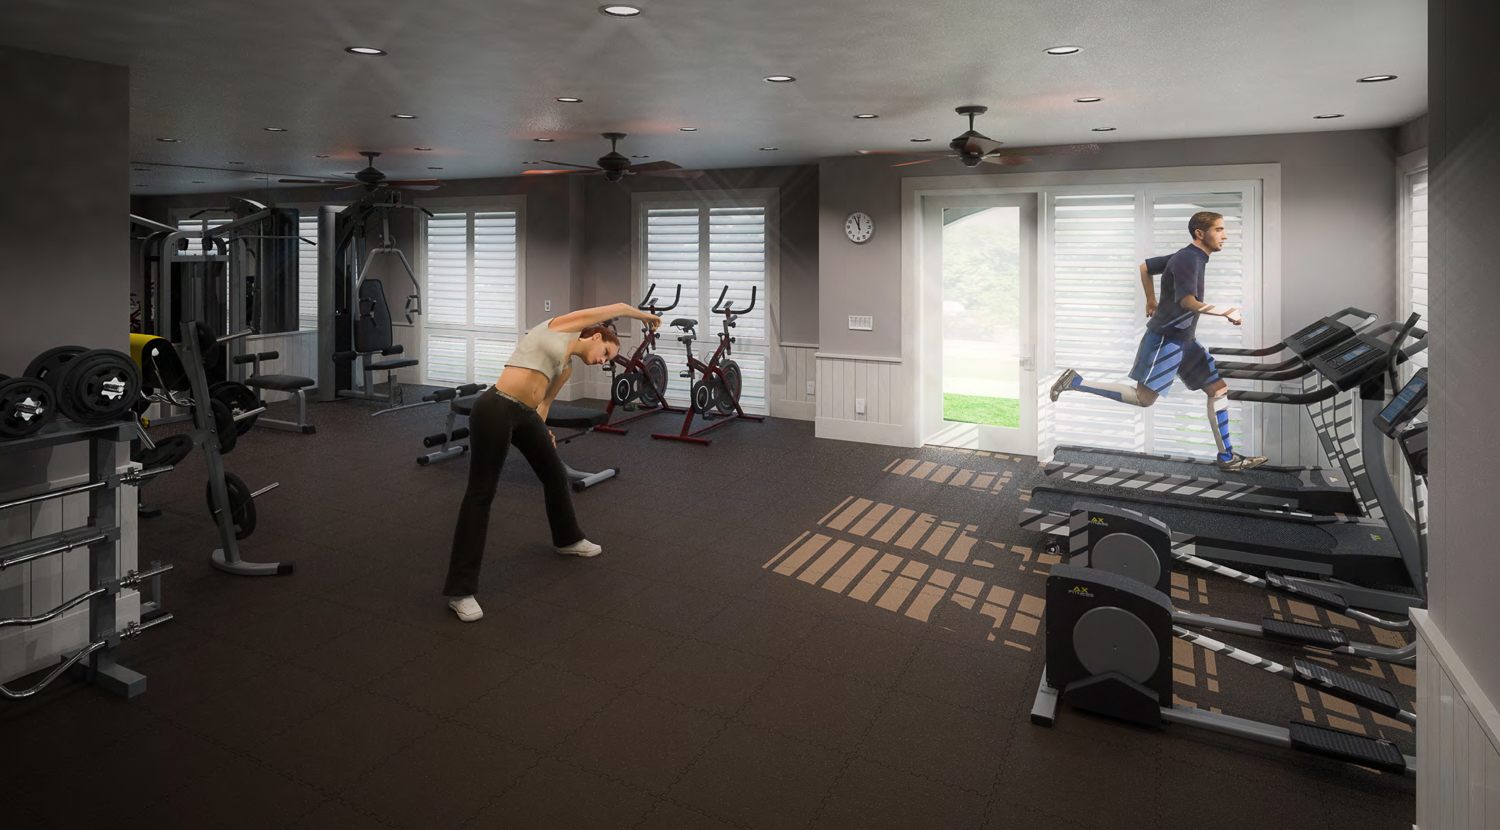 Amáre Apartments fitness center, rendering by Johnson Lyman Architects